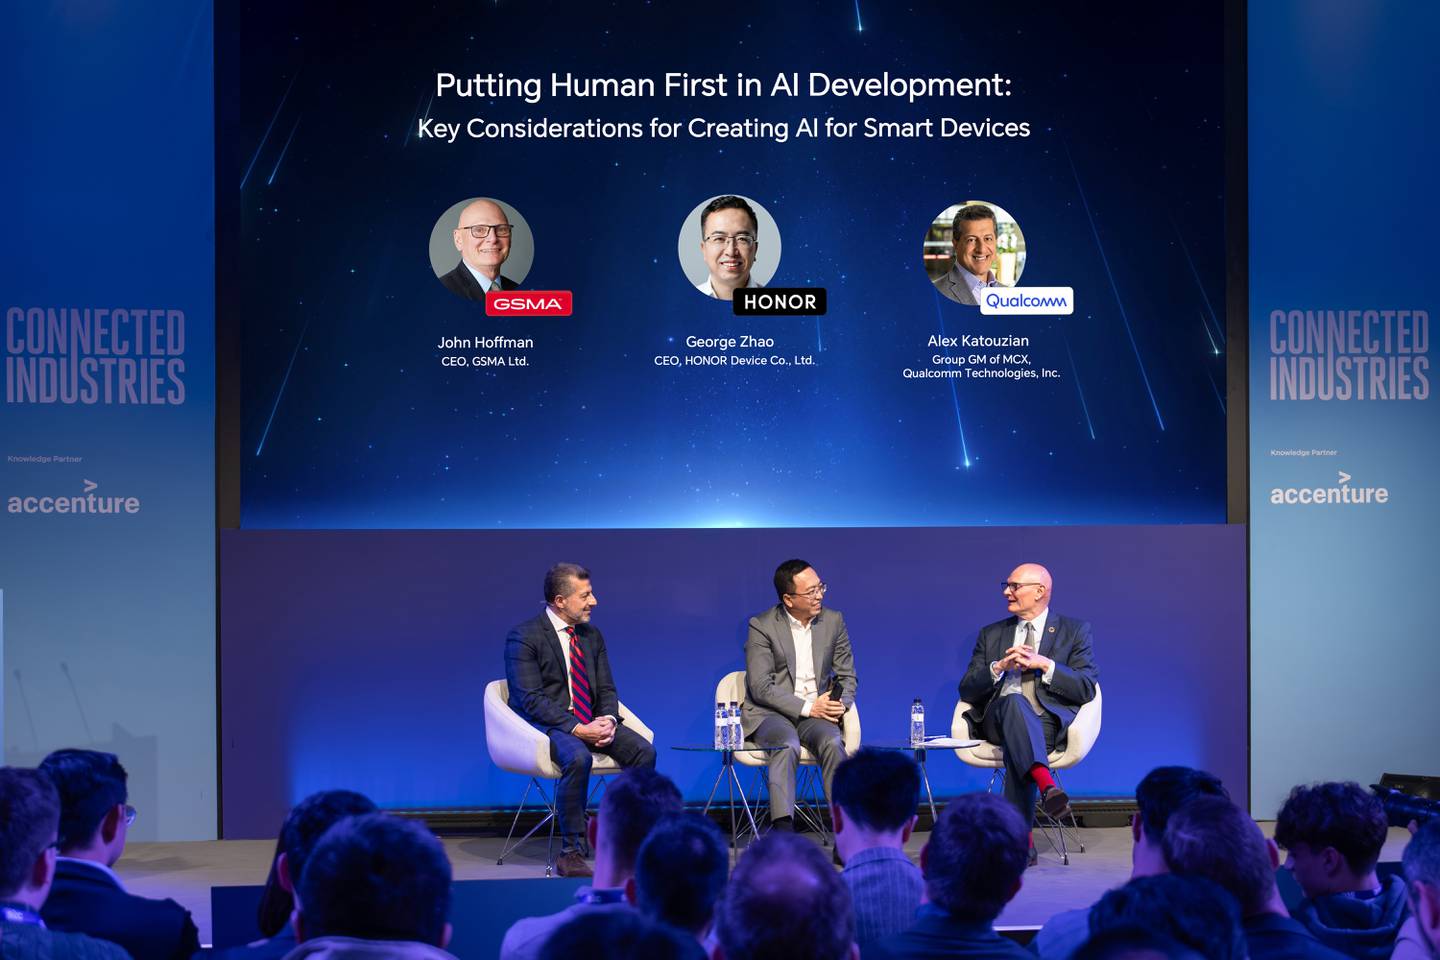 Panel discussion at MWC 2024 on ‘Putting Humans First in AI Development: Key Considerations for Creating AI for Smart Devices’. Panellists on stage from left to right: Qualcomm's Alex Katouzian, Honor's George Zhao and GSMA's John Hoffman.